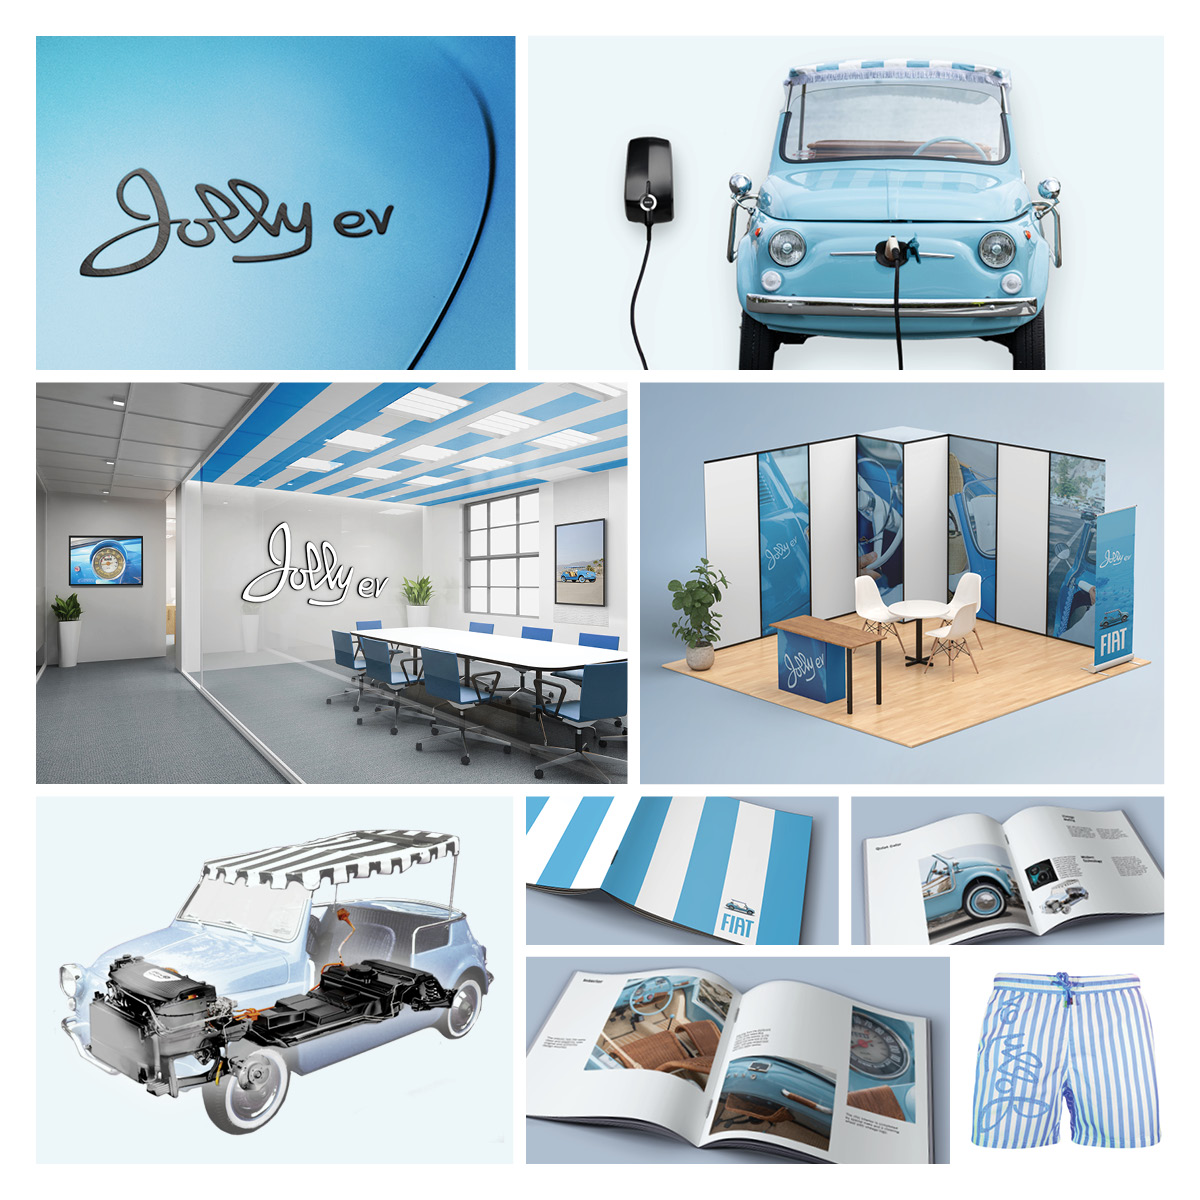 A branded vision board for a blue FIAT Jolly car with the FIAT emblem, hooked up to a charging station, and a trade show display.